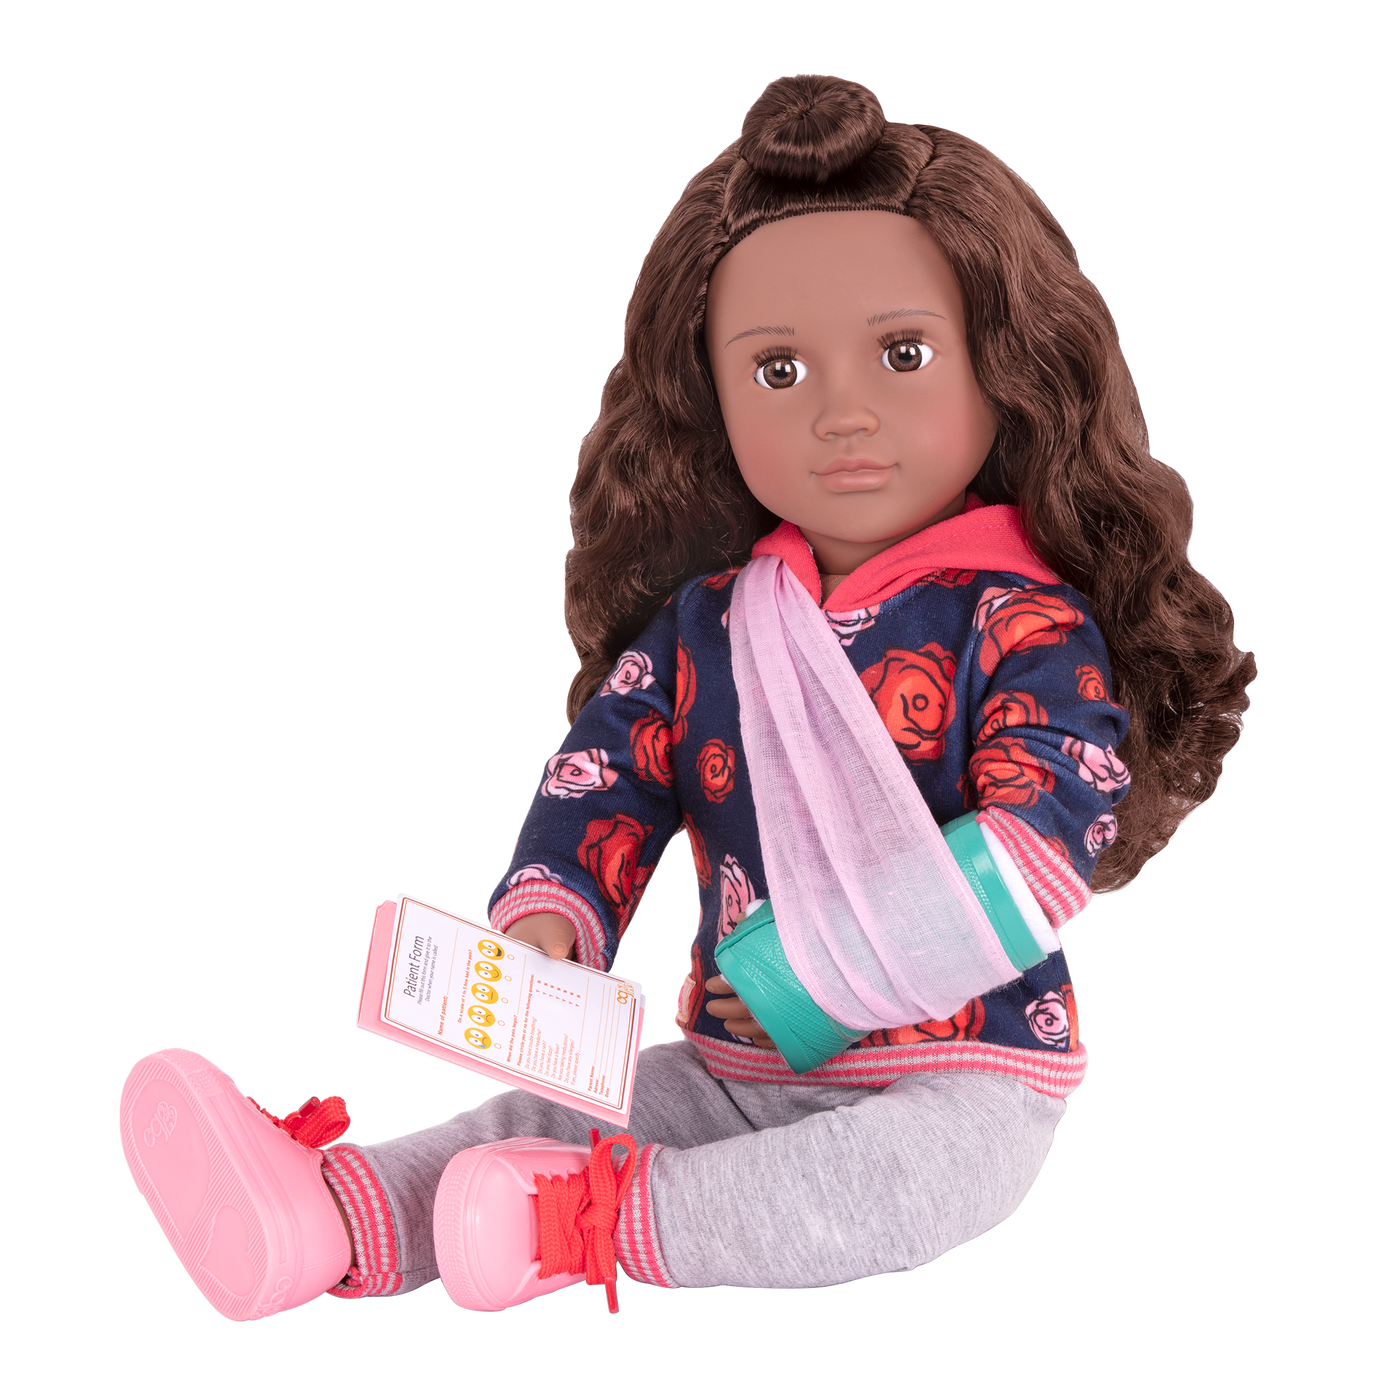 18-inch doll with brown hair, brown eyes, hospital accessories and storybook